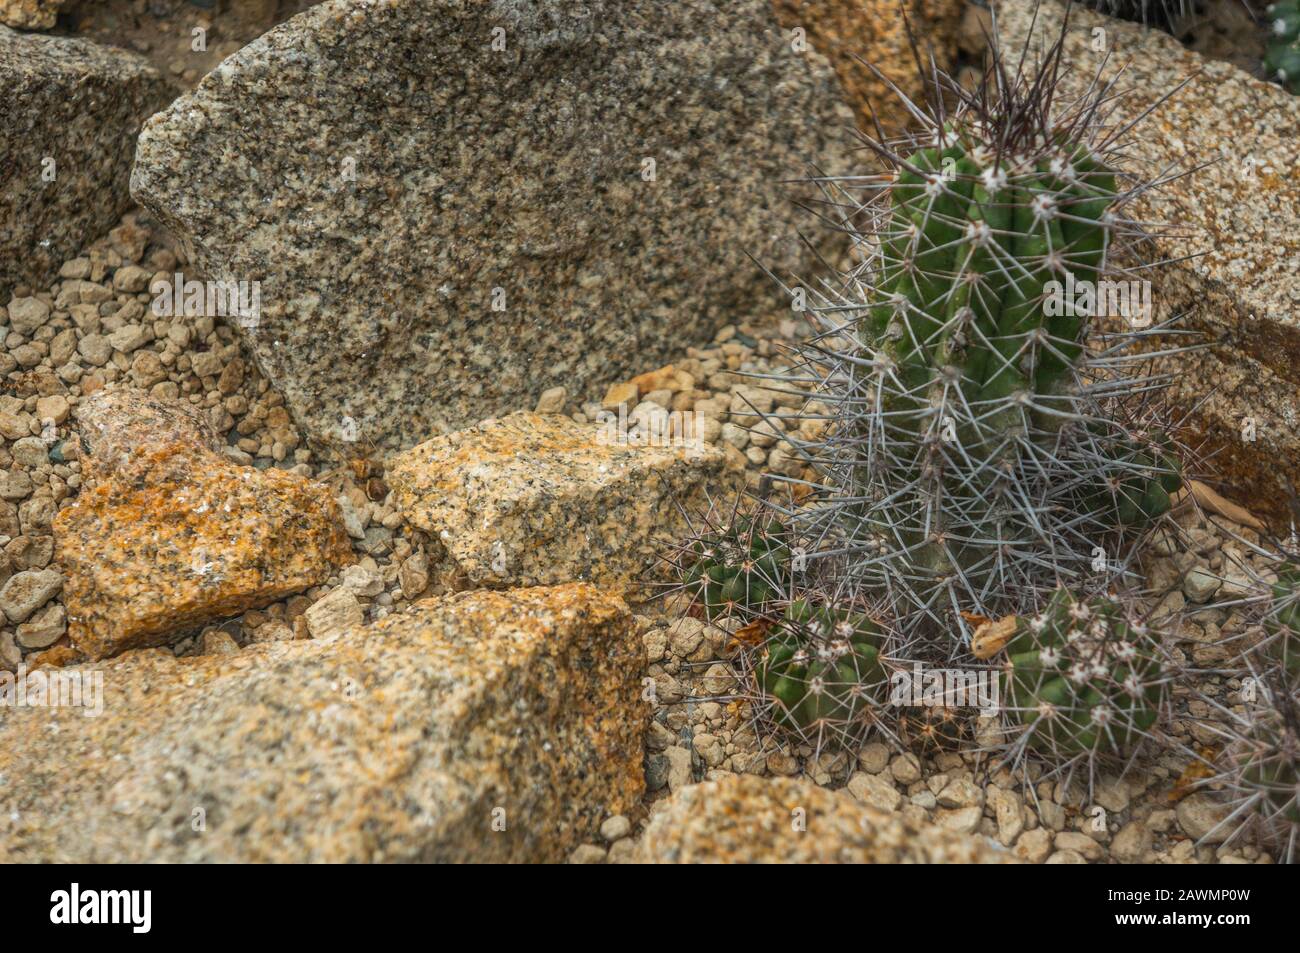 Small group of  green 'copiapoa echinata' cactus plants with yellow needles. Yellow and orange rocks in daylight as background and in foreground Stock Photo